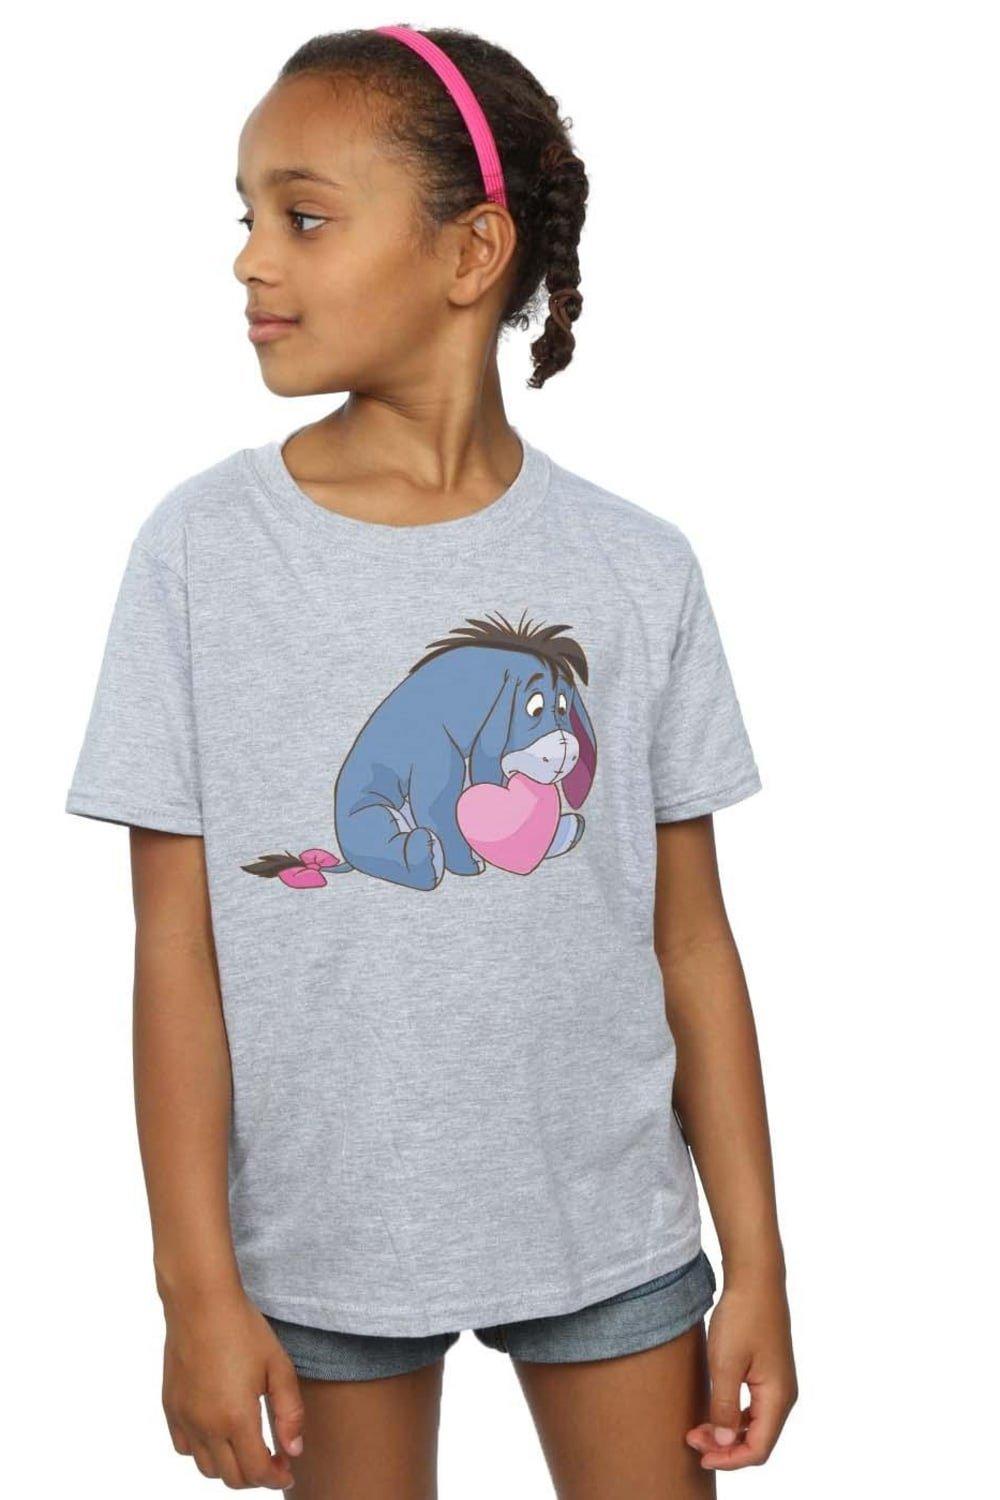 Winnie The Pooh Eeyore Mouth Cotton T-Shirt